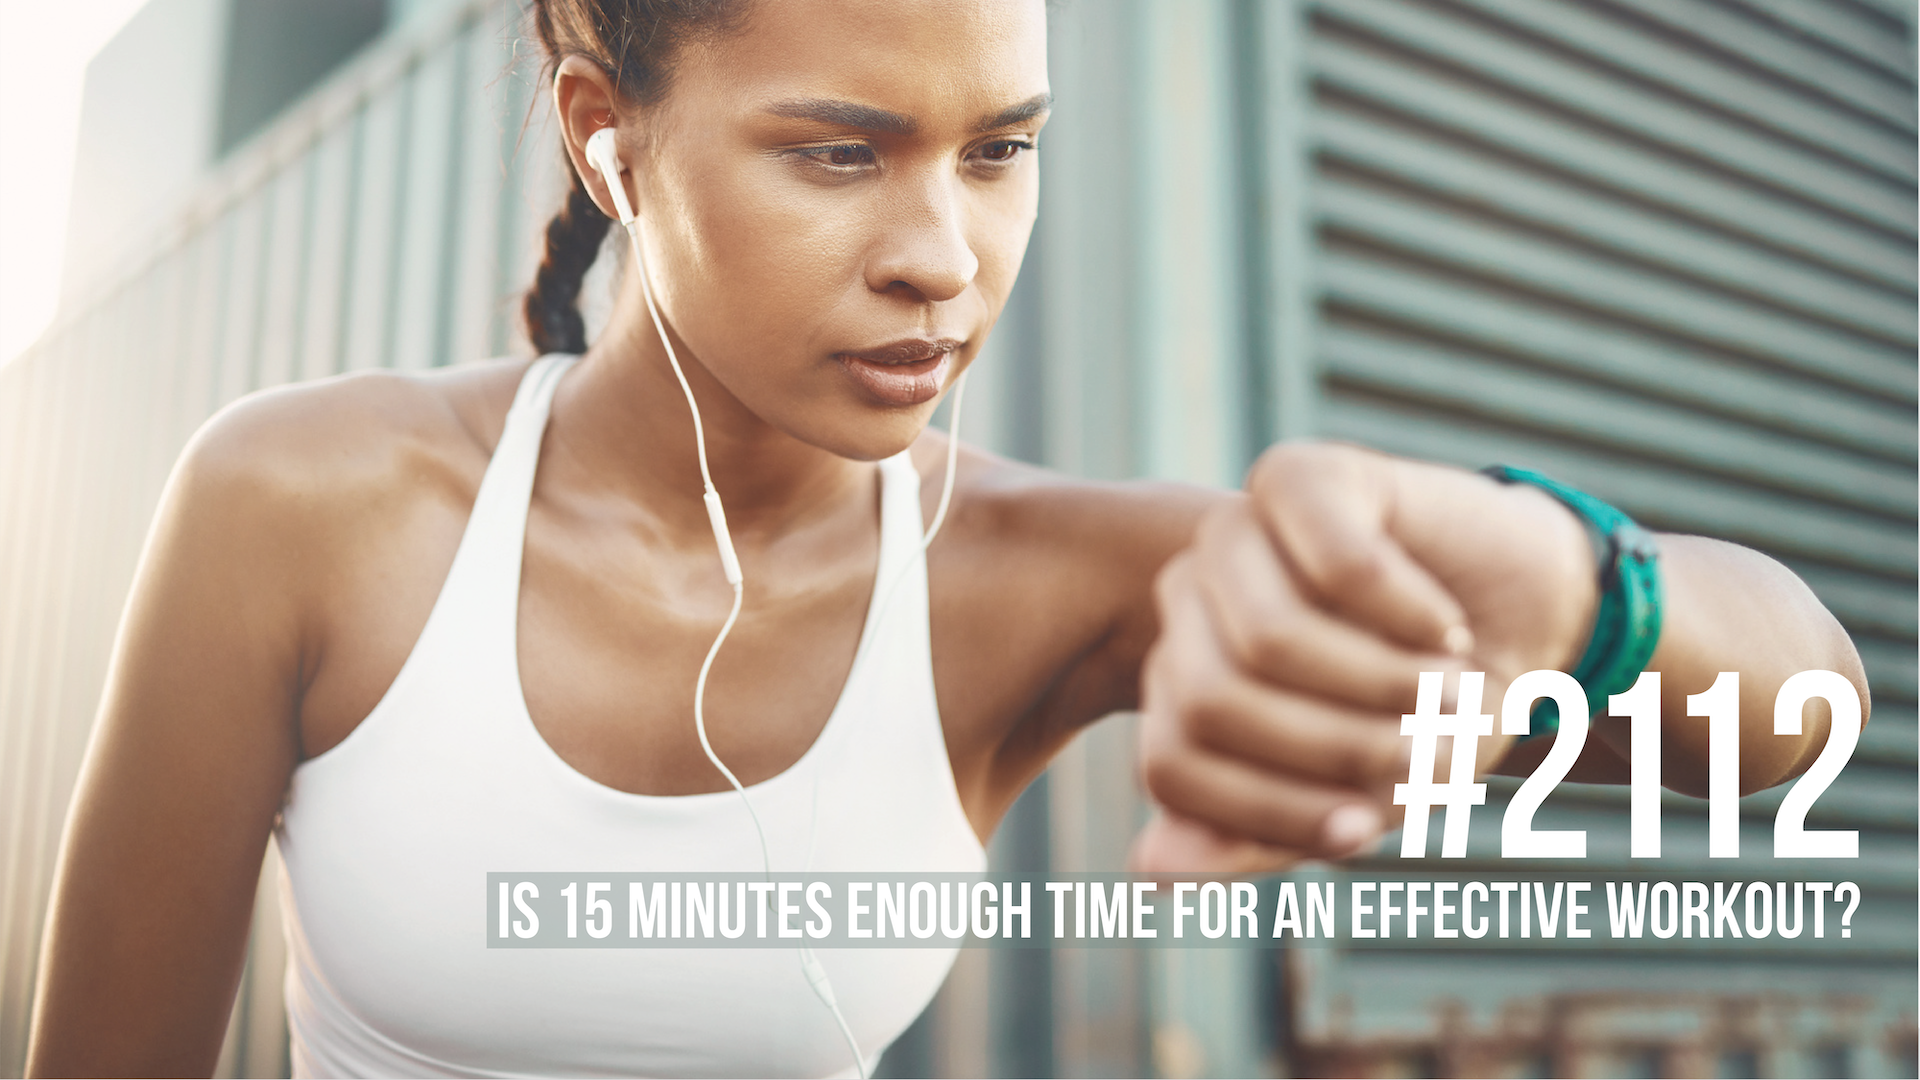 2112: Is 15 Minutes Enough Time for an Effective Workout?